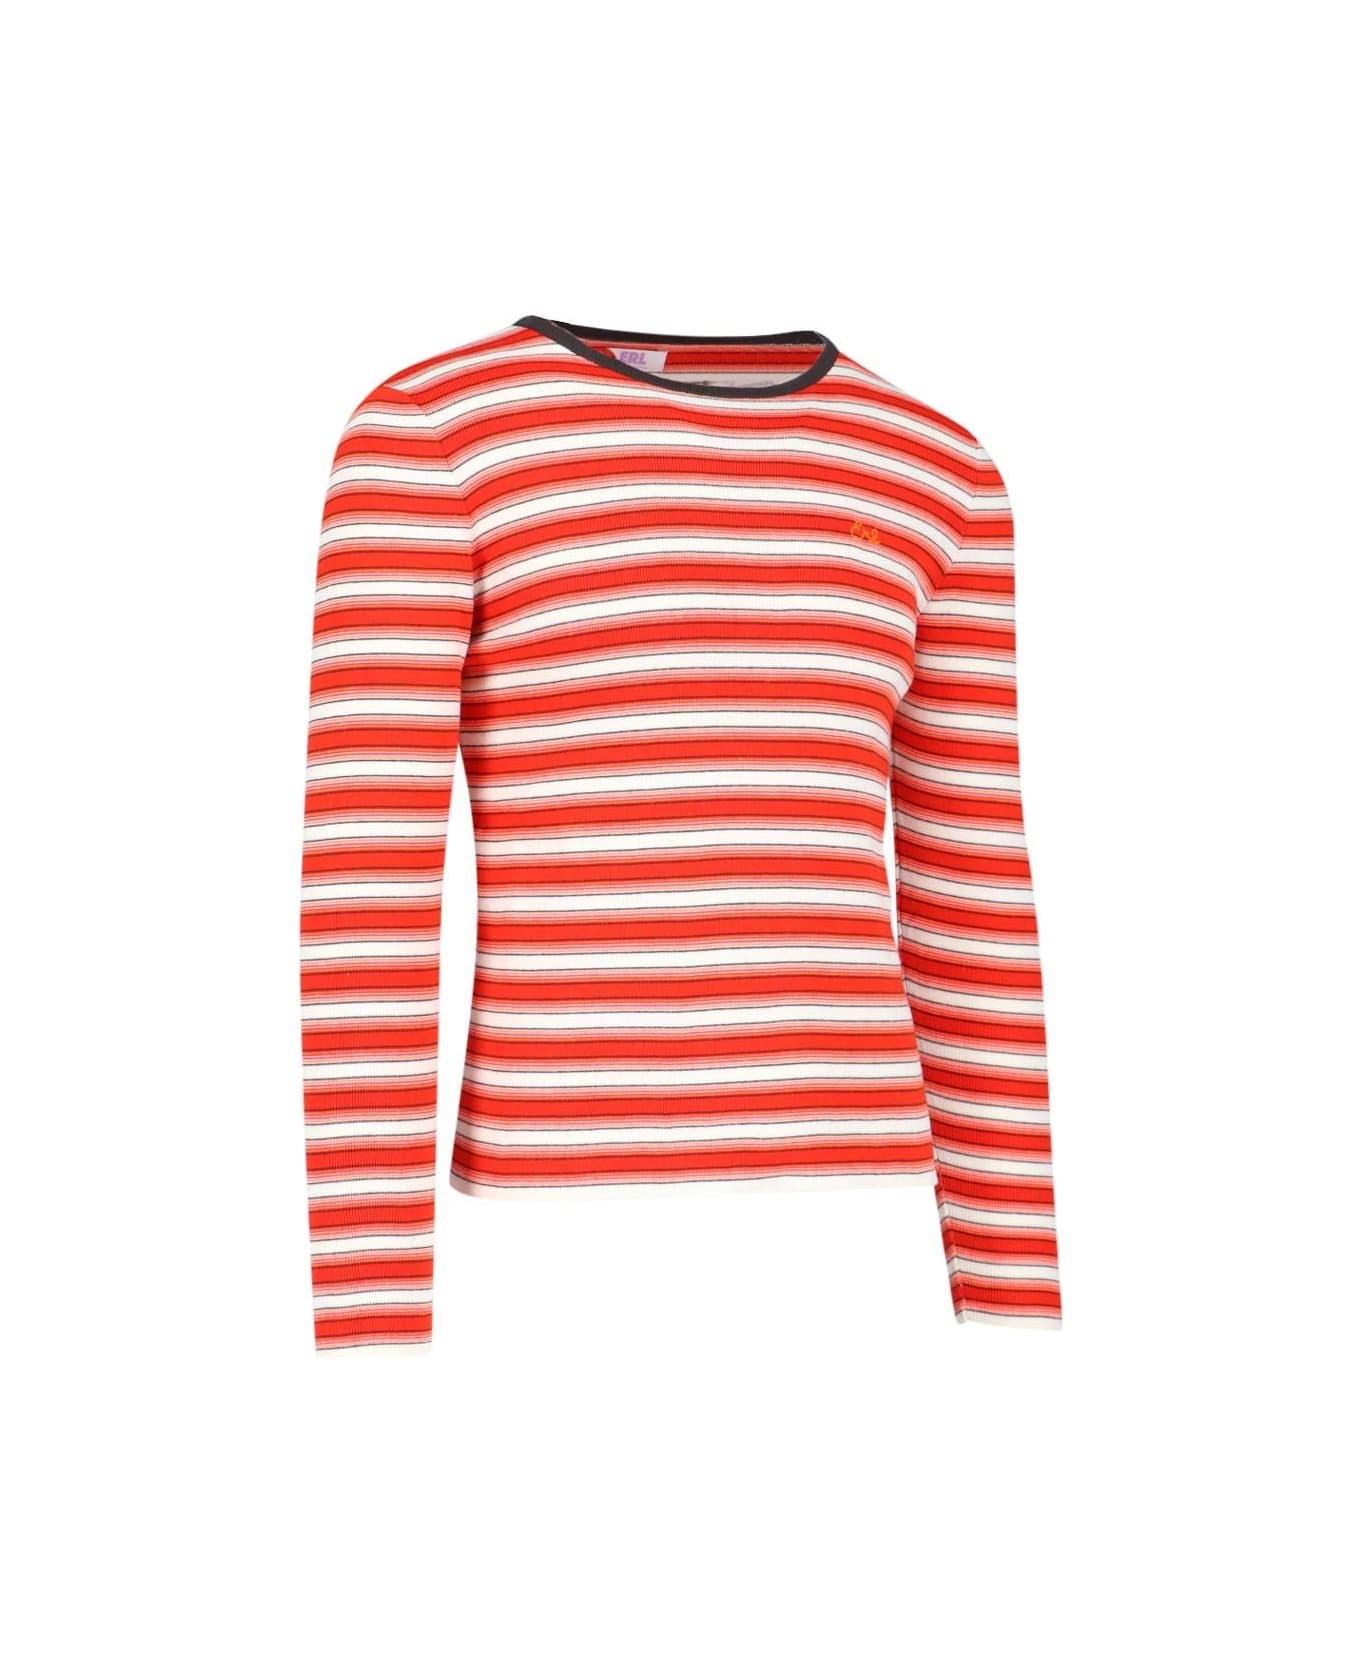 ERL Striped T-shirt - Red